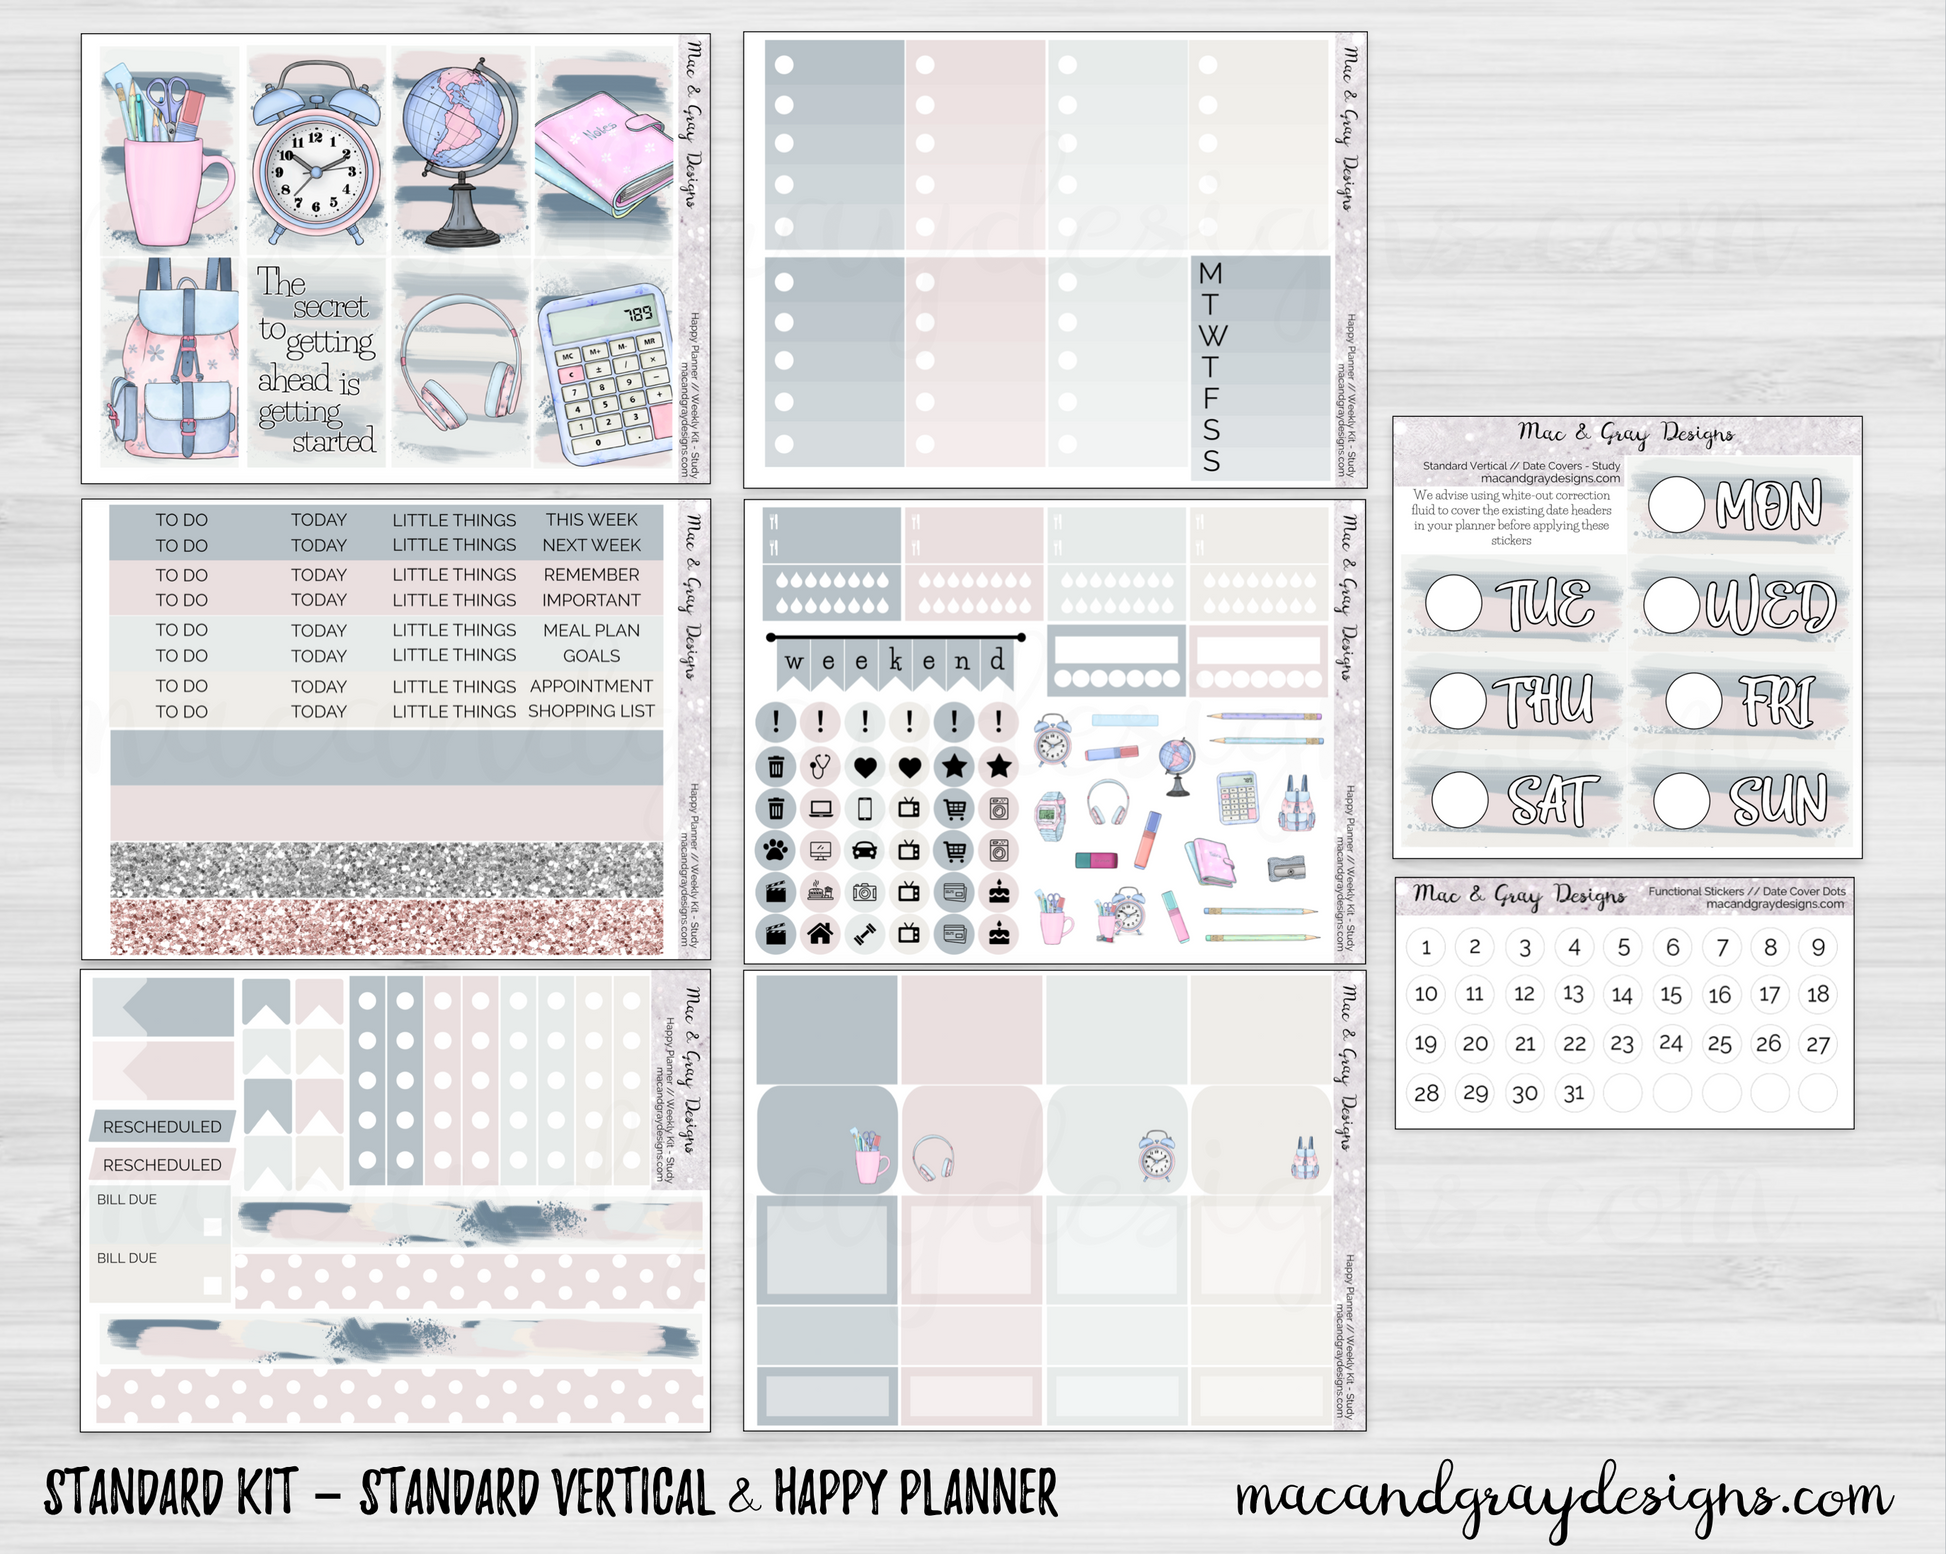 The Complete Planner Sticker Kit